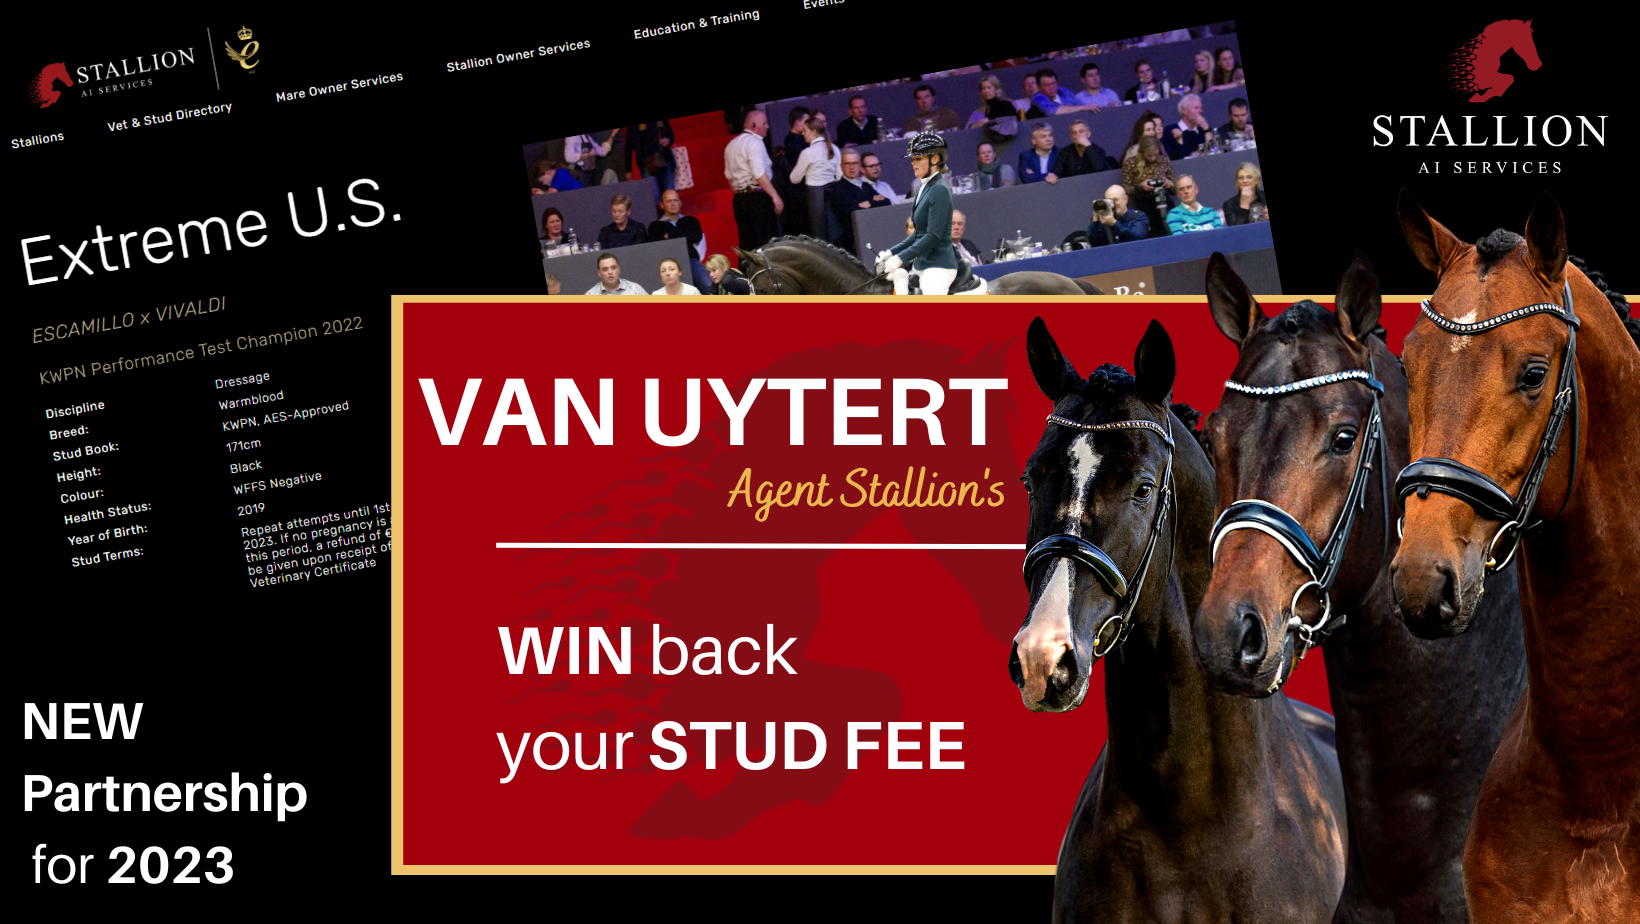 WIN BACK YOUR STUD FEE